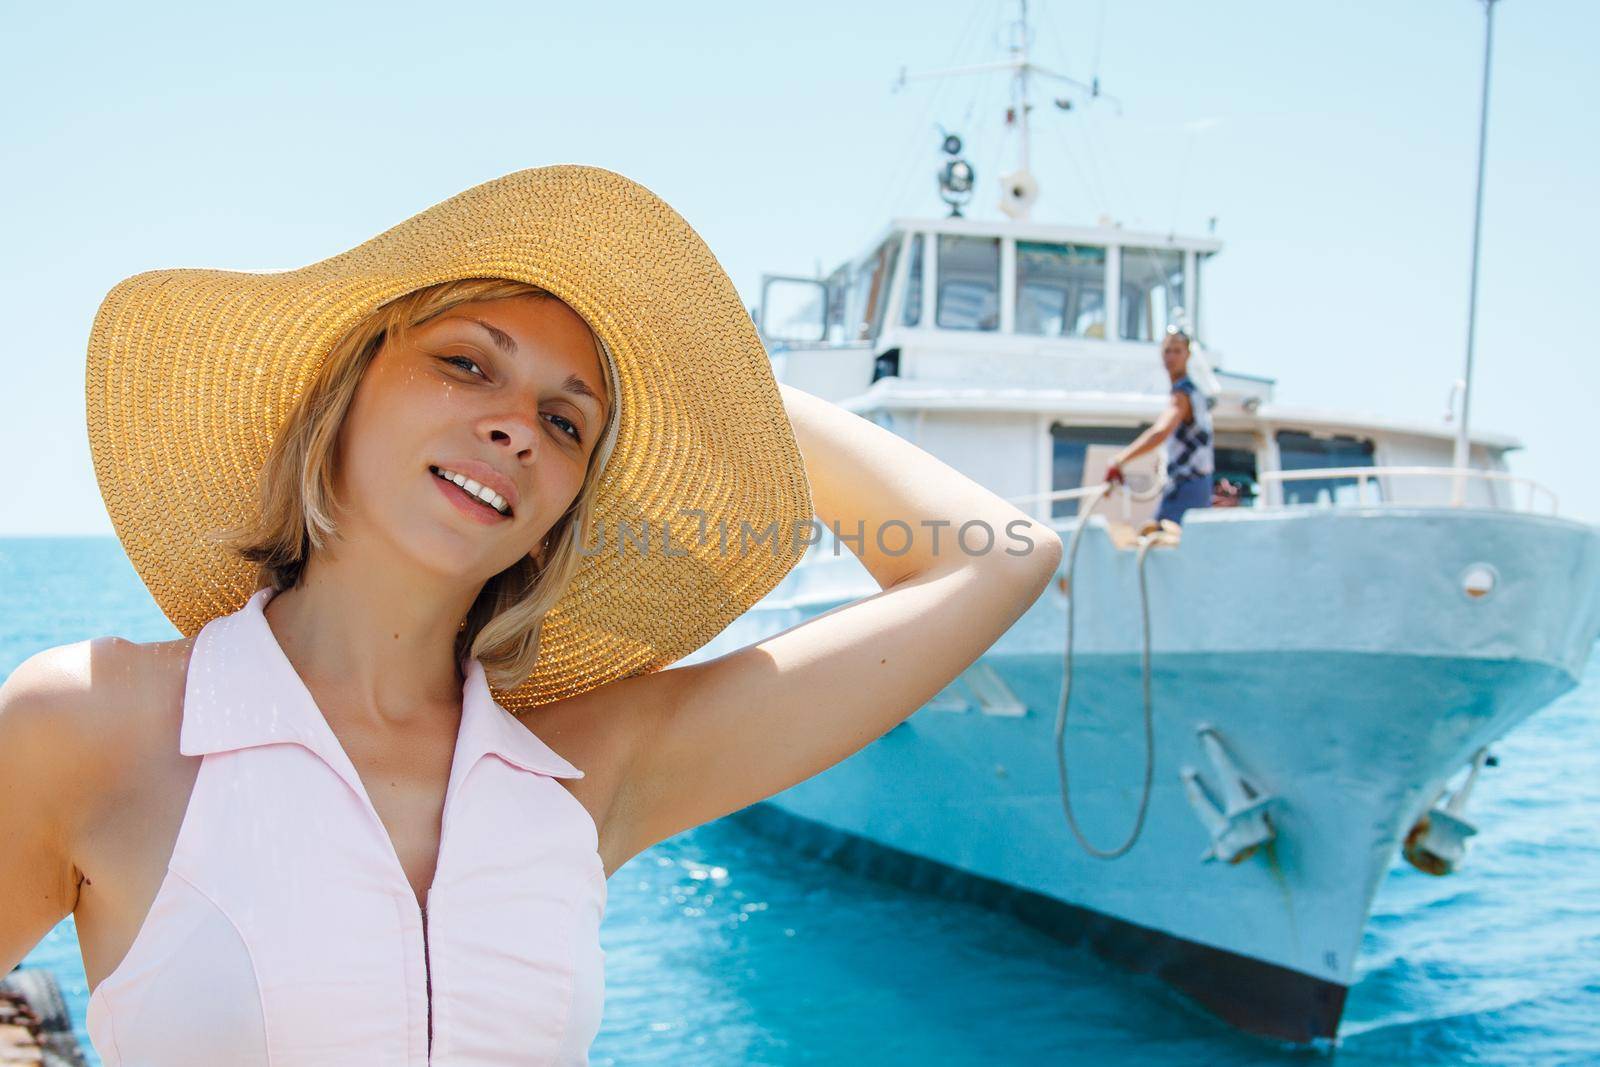 Smiling blonde attractive woman posing in hat. Ship on the sea on background.